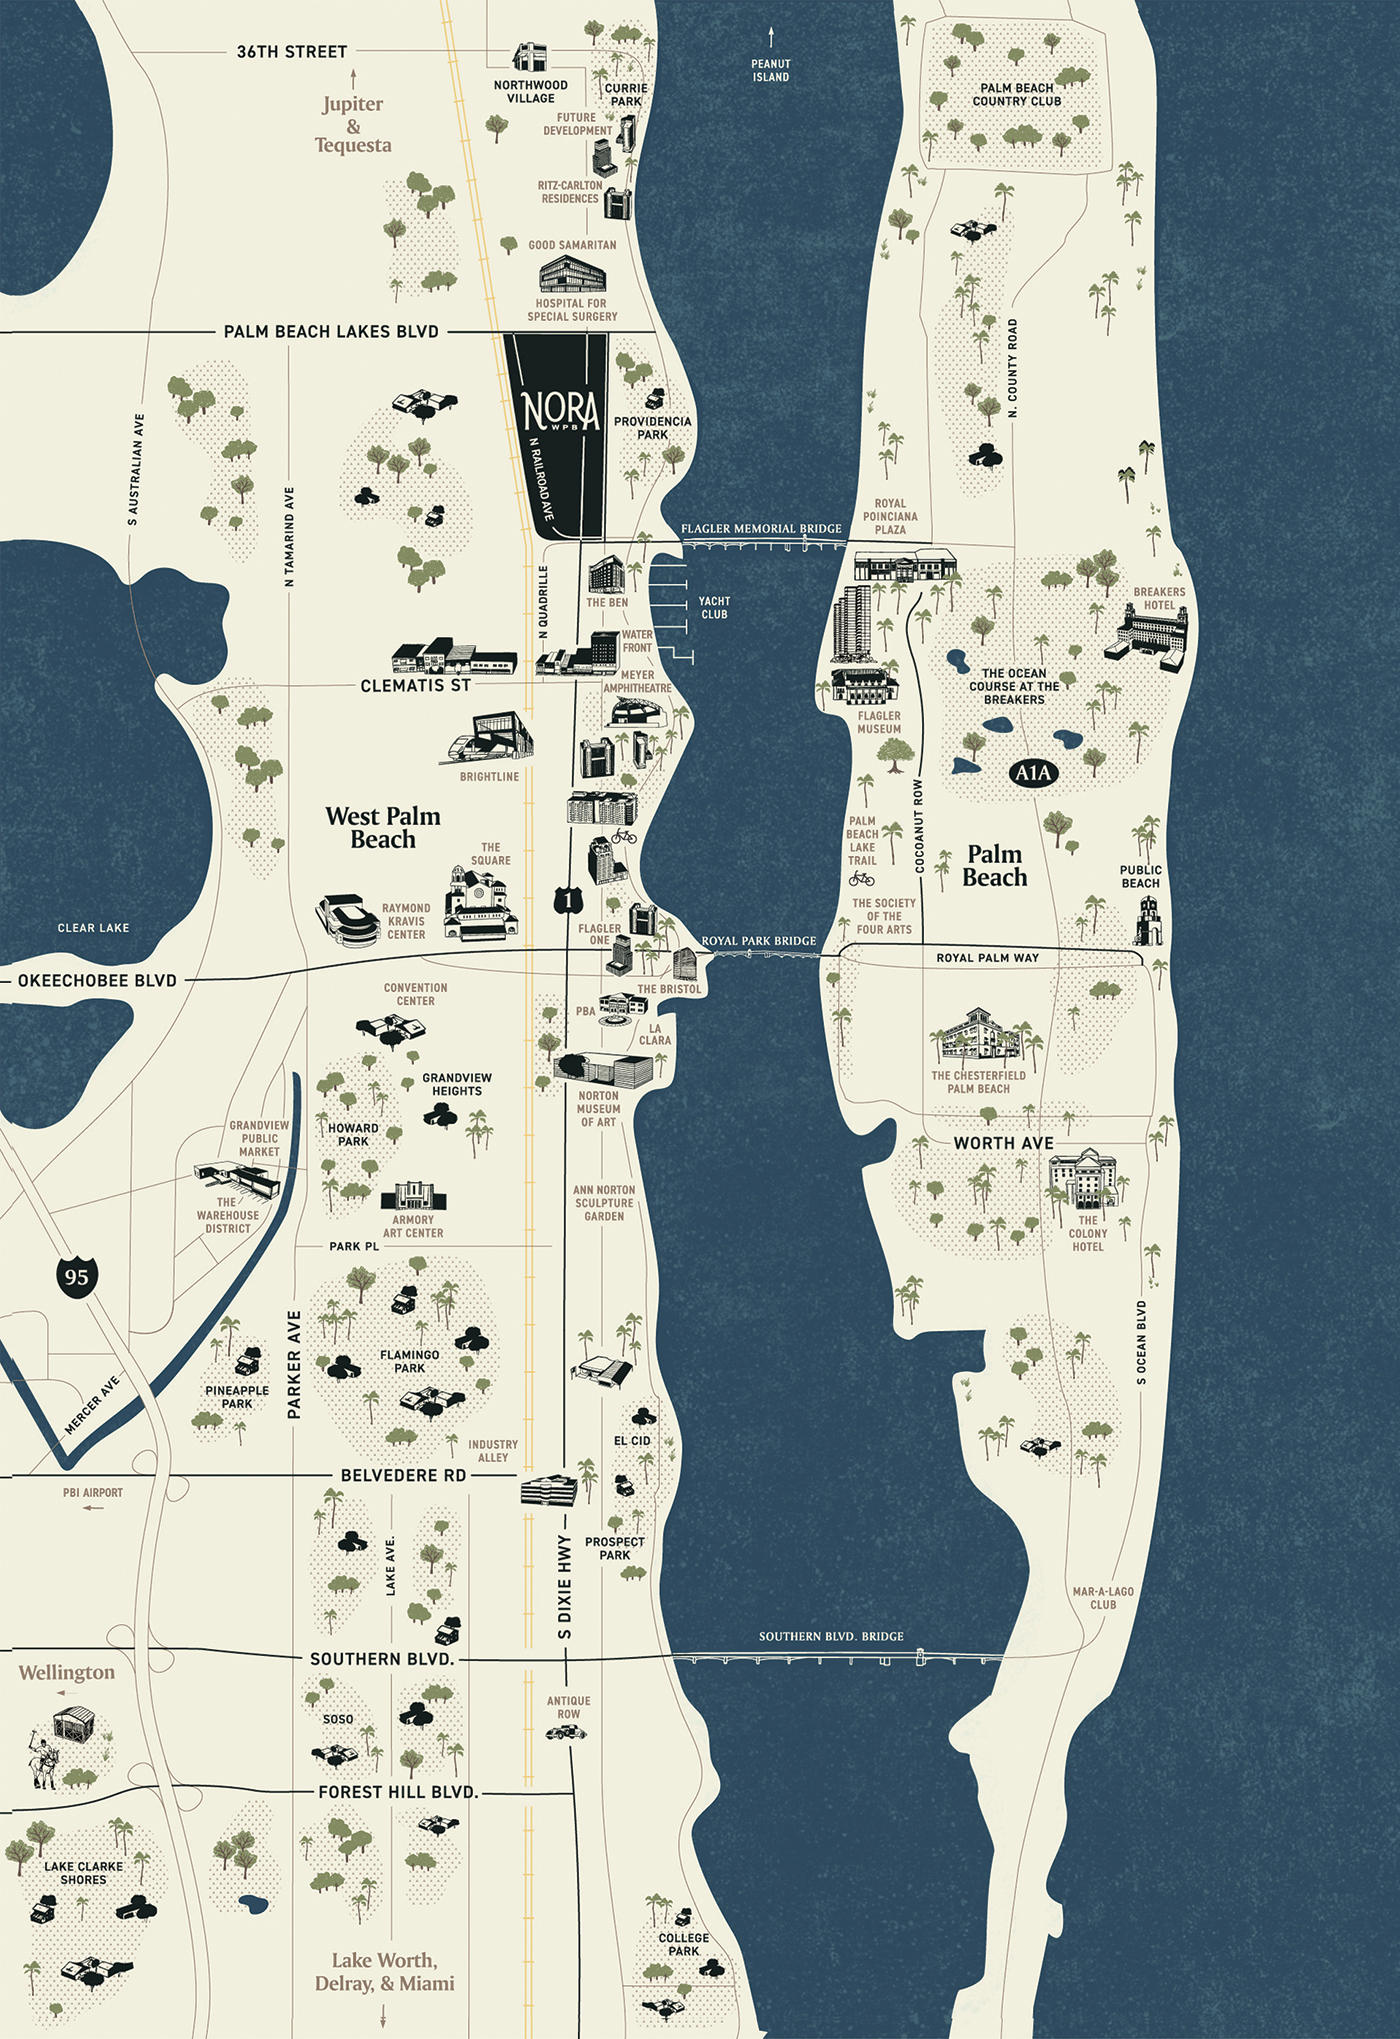 Illustrative map of West Palm beach and the surrounding area, designed for NORA. Custom illustrations of local landmarks are shown, on a cream and navy minimalistic map layout.